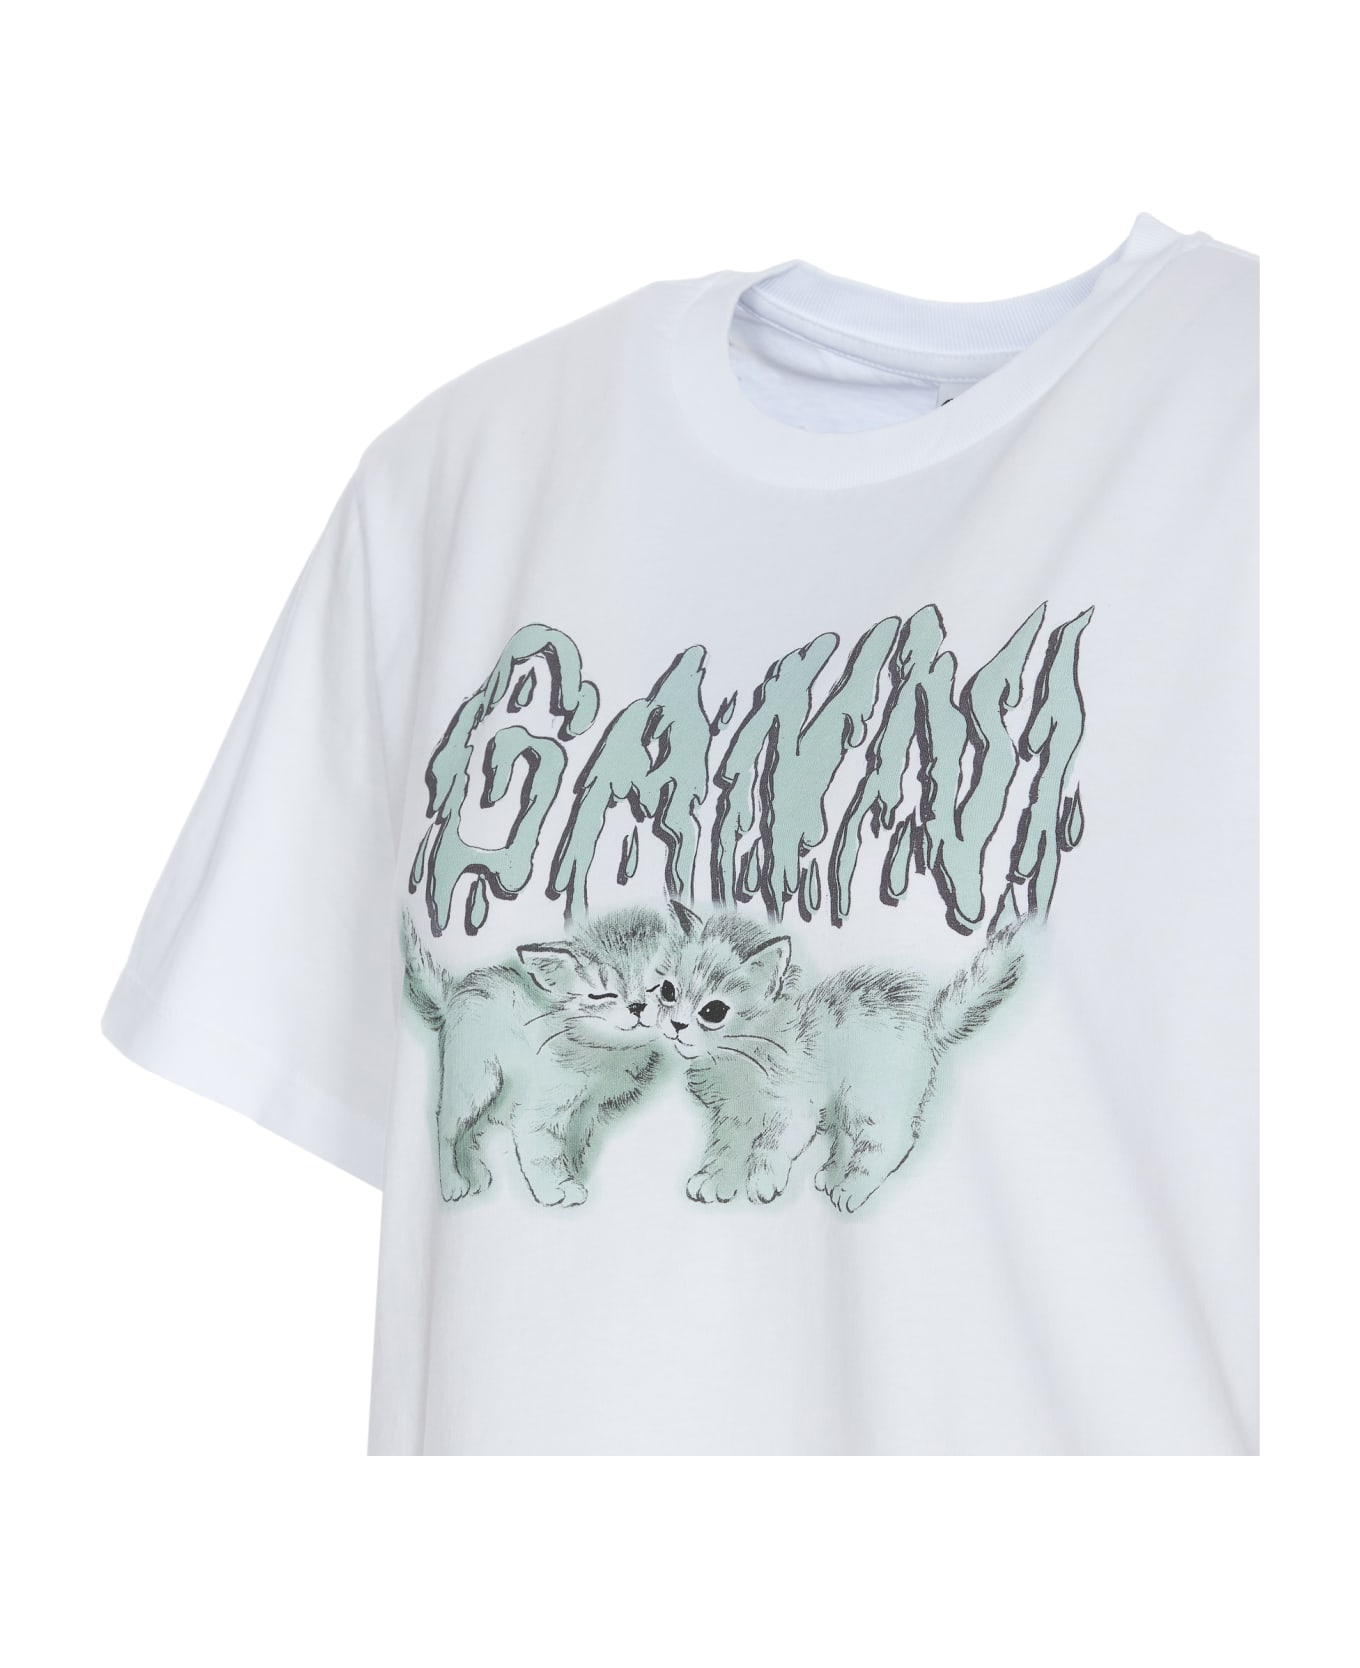 Ganni Basic Jersey Love Cats Relaxed T-shirt - White Tシャツ